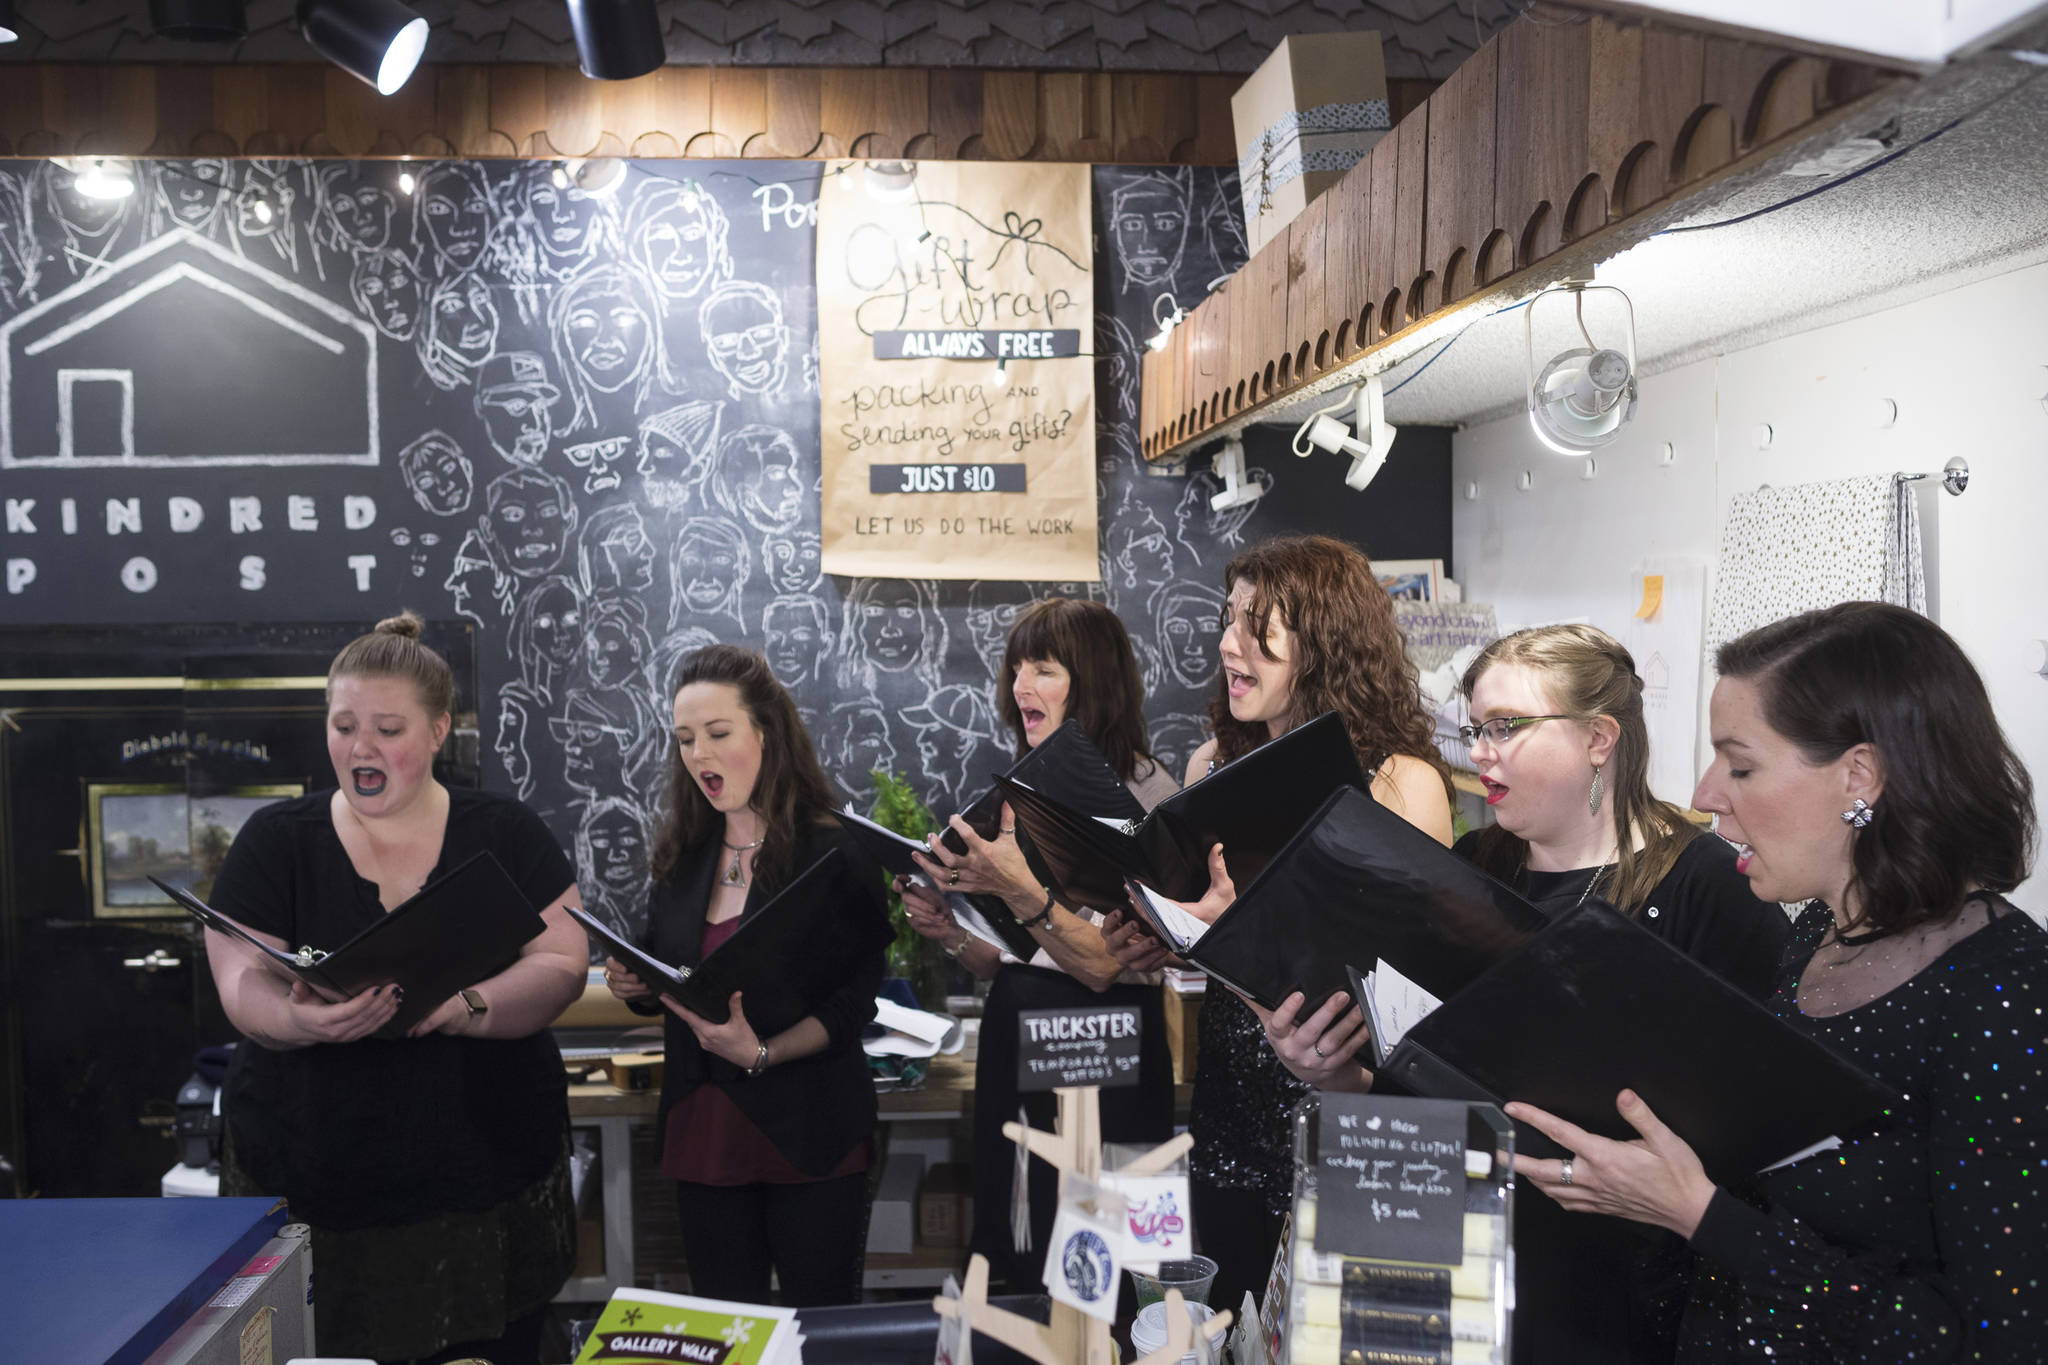 Members of “Bell Bell Bell, What Do We Have Here” sing carols at Kindred Post during Gallery Walk on Friday, Dec. 7, 2018. (Michael Penn | Juneau Empire)